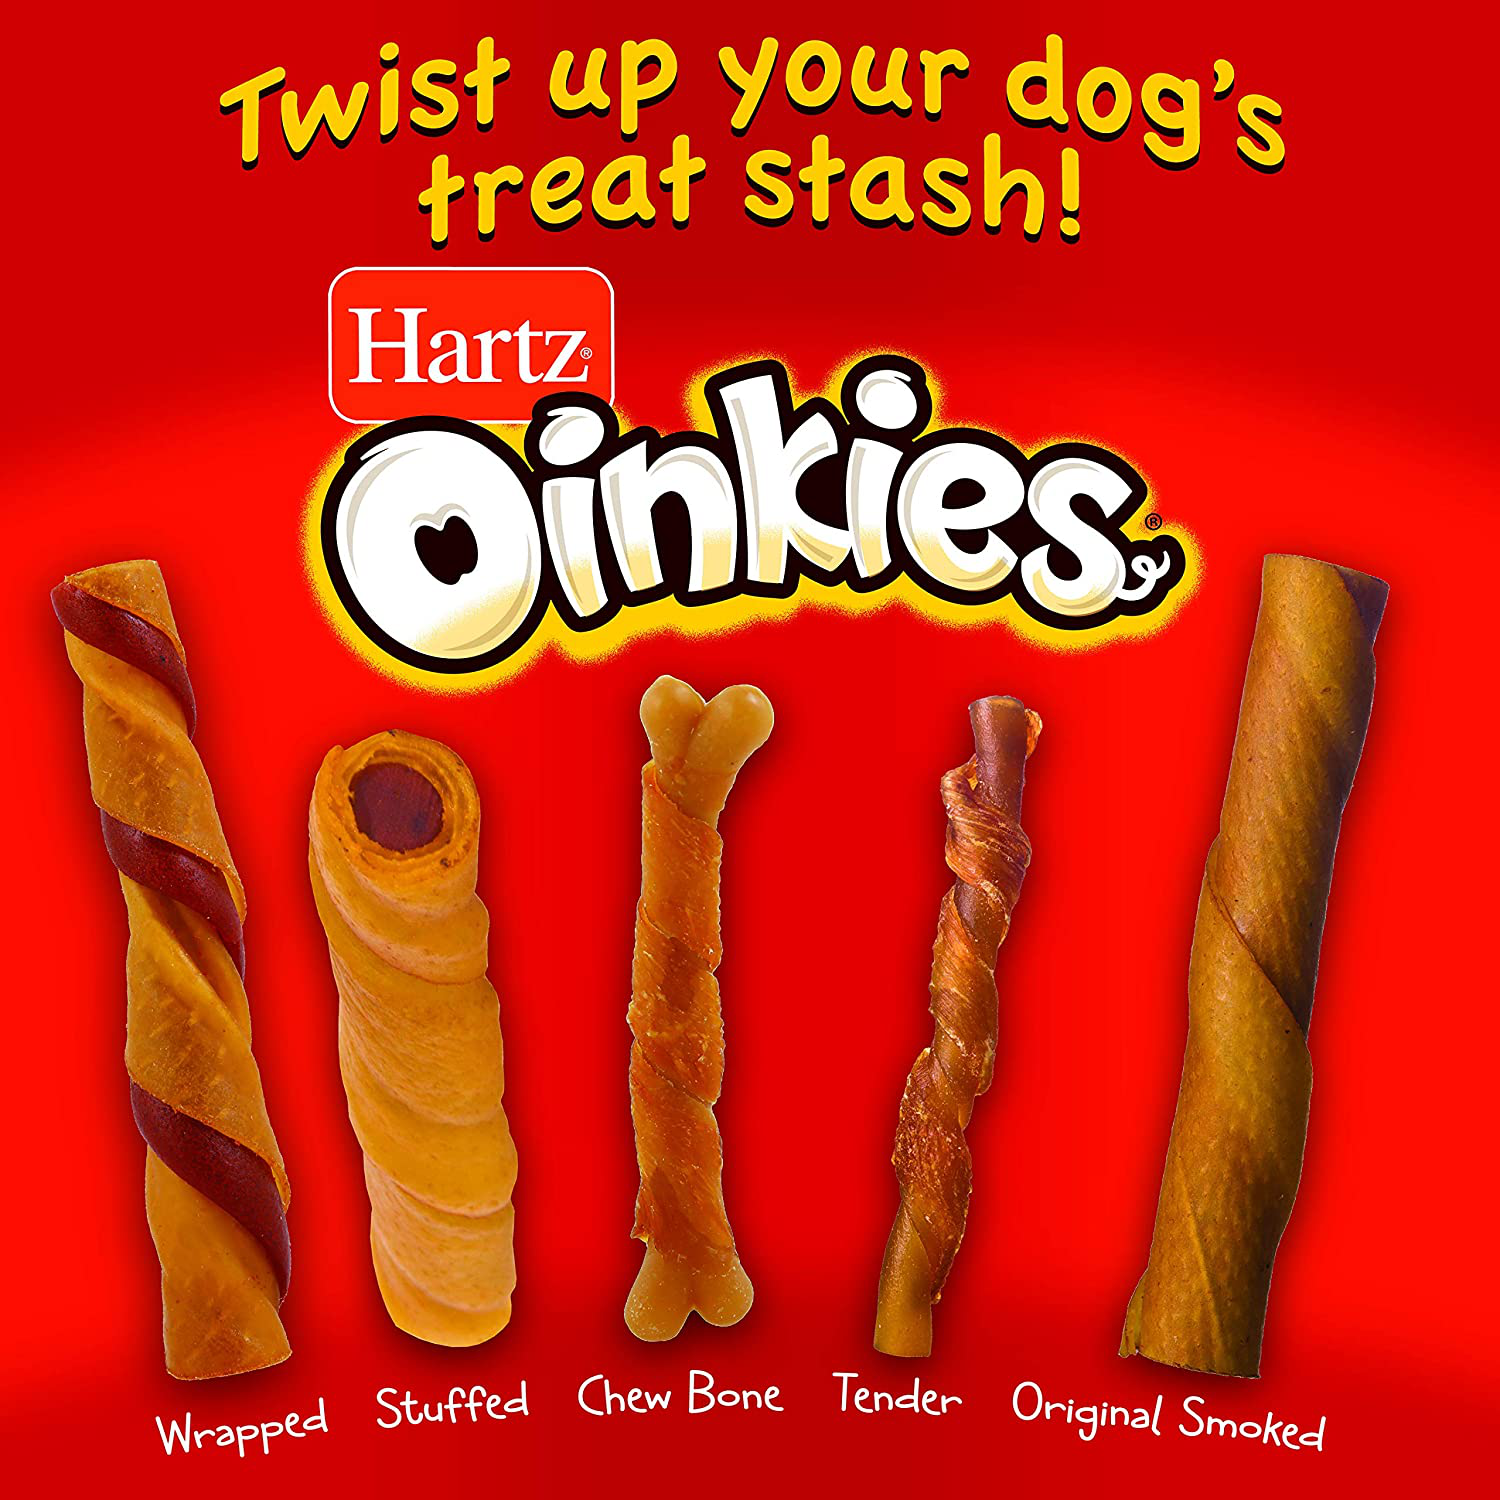 Hartz Oinkies Rawhide-Free Tender Treats Wrapped with Chicken Dog Treats Chews, Various Sizes, Highly Digestible, No Artificial Flavors, Perfect for Smaller and Senior Dogs Animals & Pet Supplies > Pet Supplies > Dog Supplies > Dog Treats Hartz   